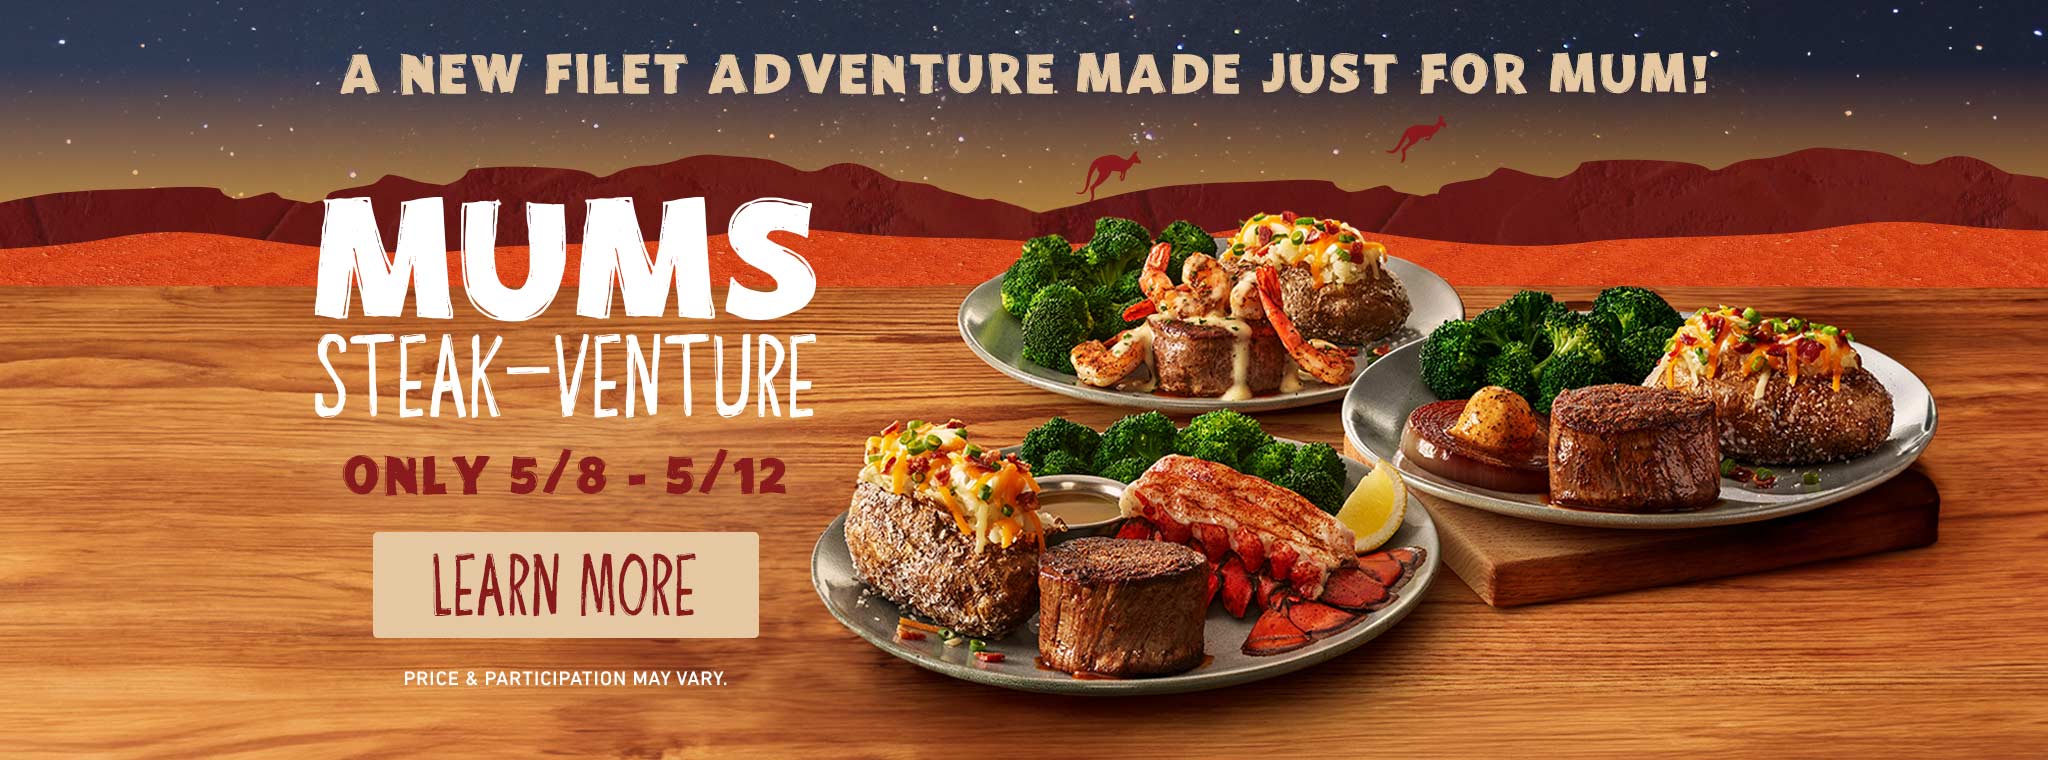 A New Filet Adventure Made Just For Mum! Mums Steak-Venture Onlye 5/8-5/12. LEARN MORE. Price & participation may vary.